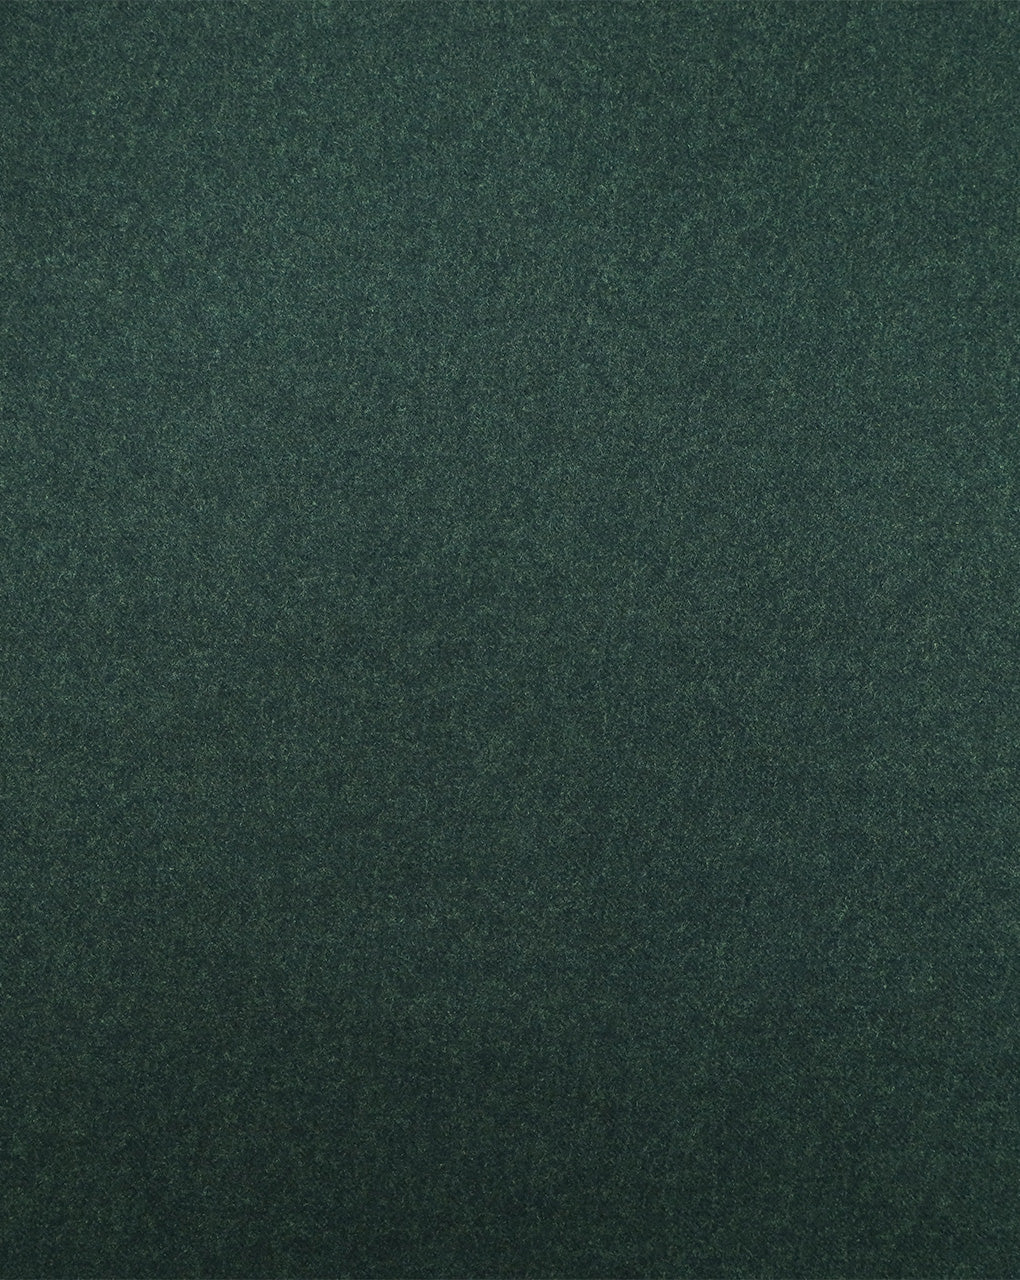 BOTTLE GREEN POLYESTER WOOLEN FABRIC (WIDTH 56 INCHES)